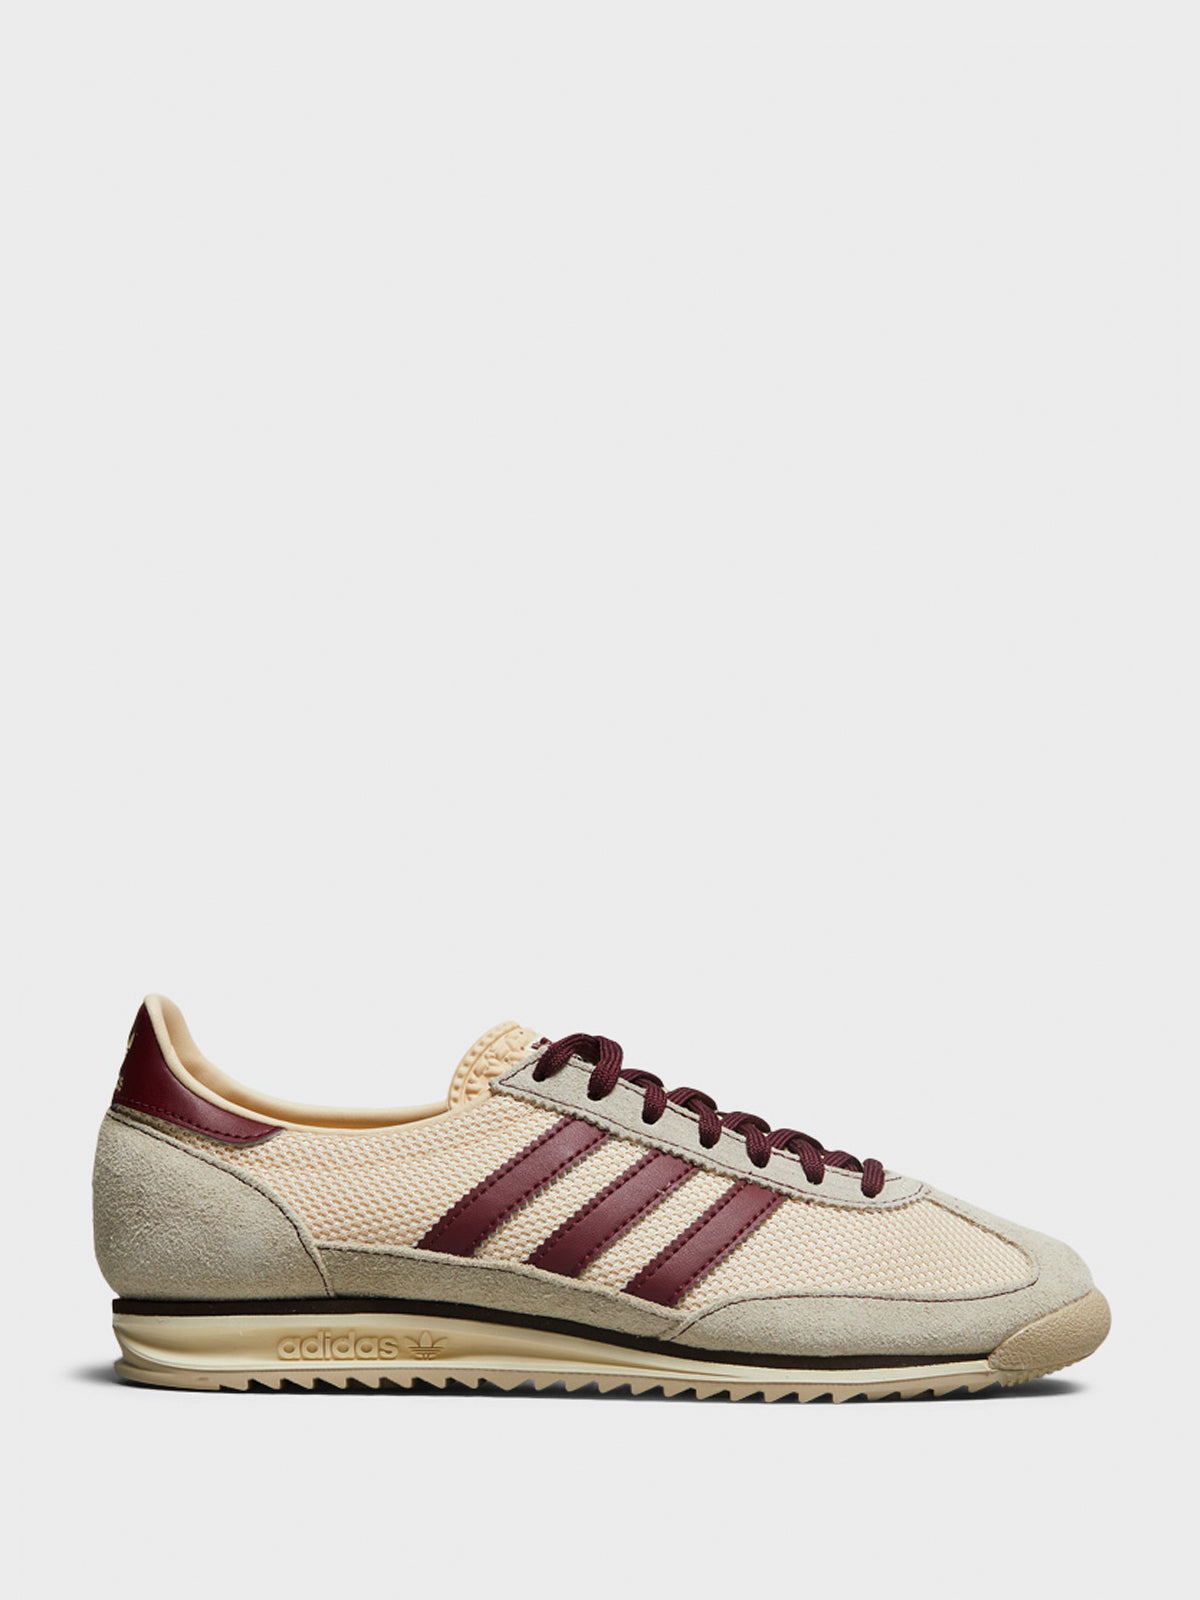 SL 72 OG Women's Sneakers in Sand, Red and Beige